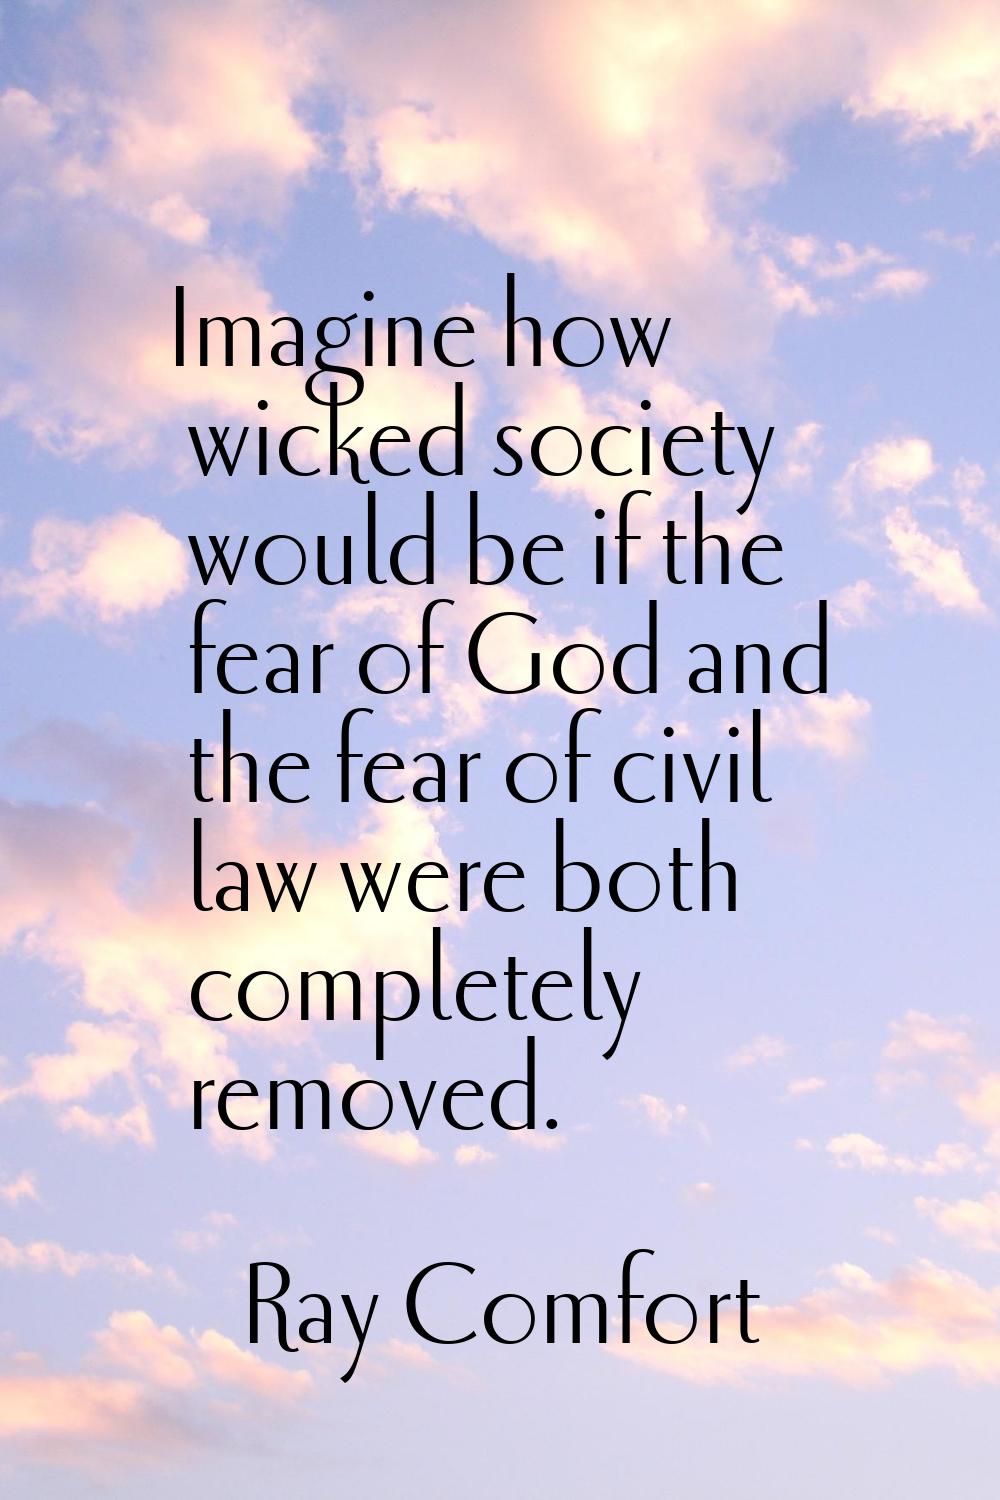 Imagine how wicked society would be if the fear of God and the fear of civil law were both complete